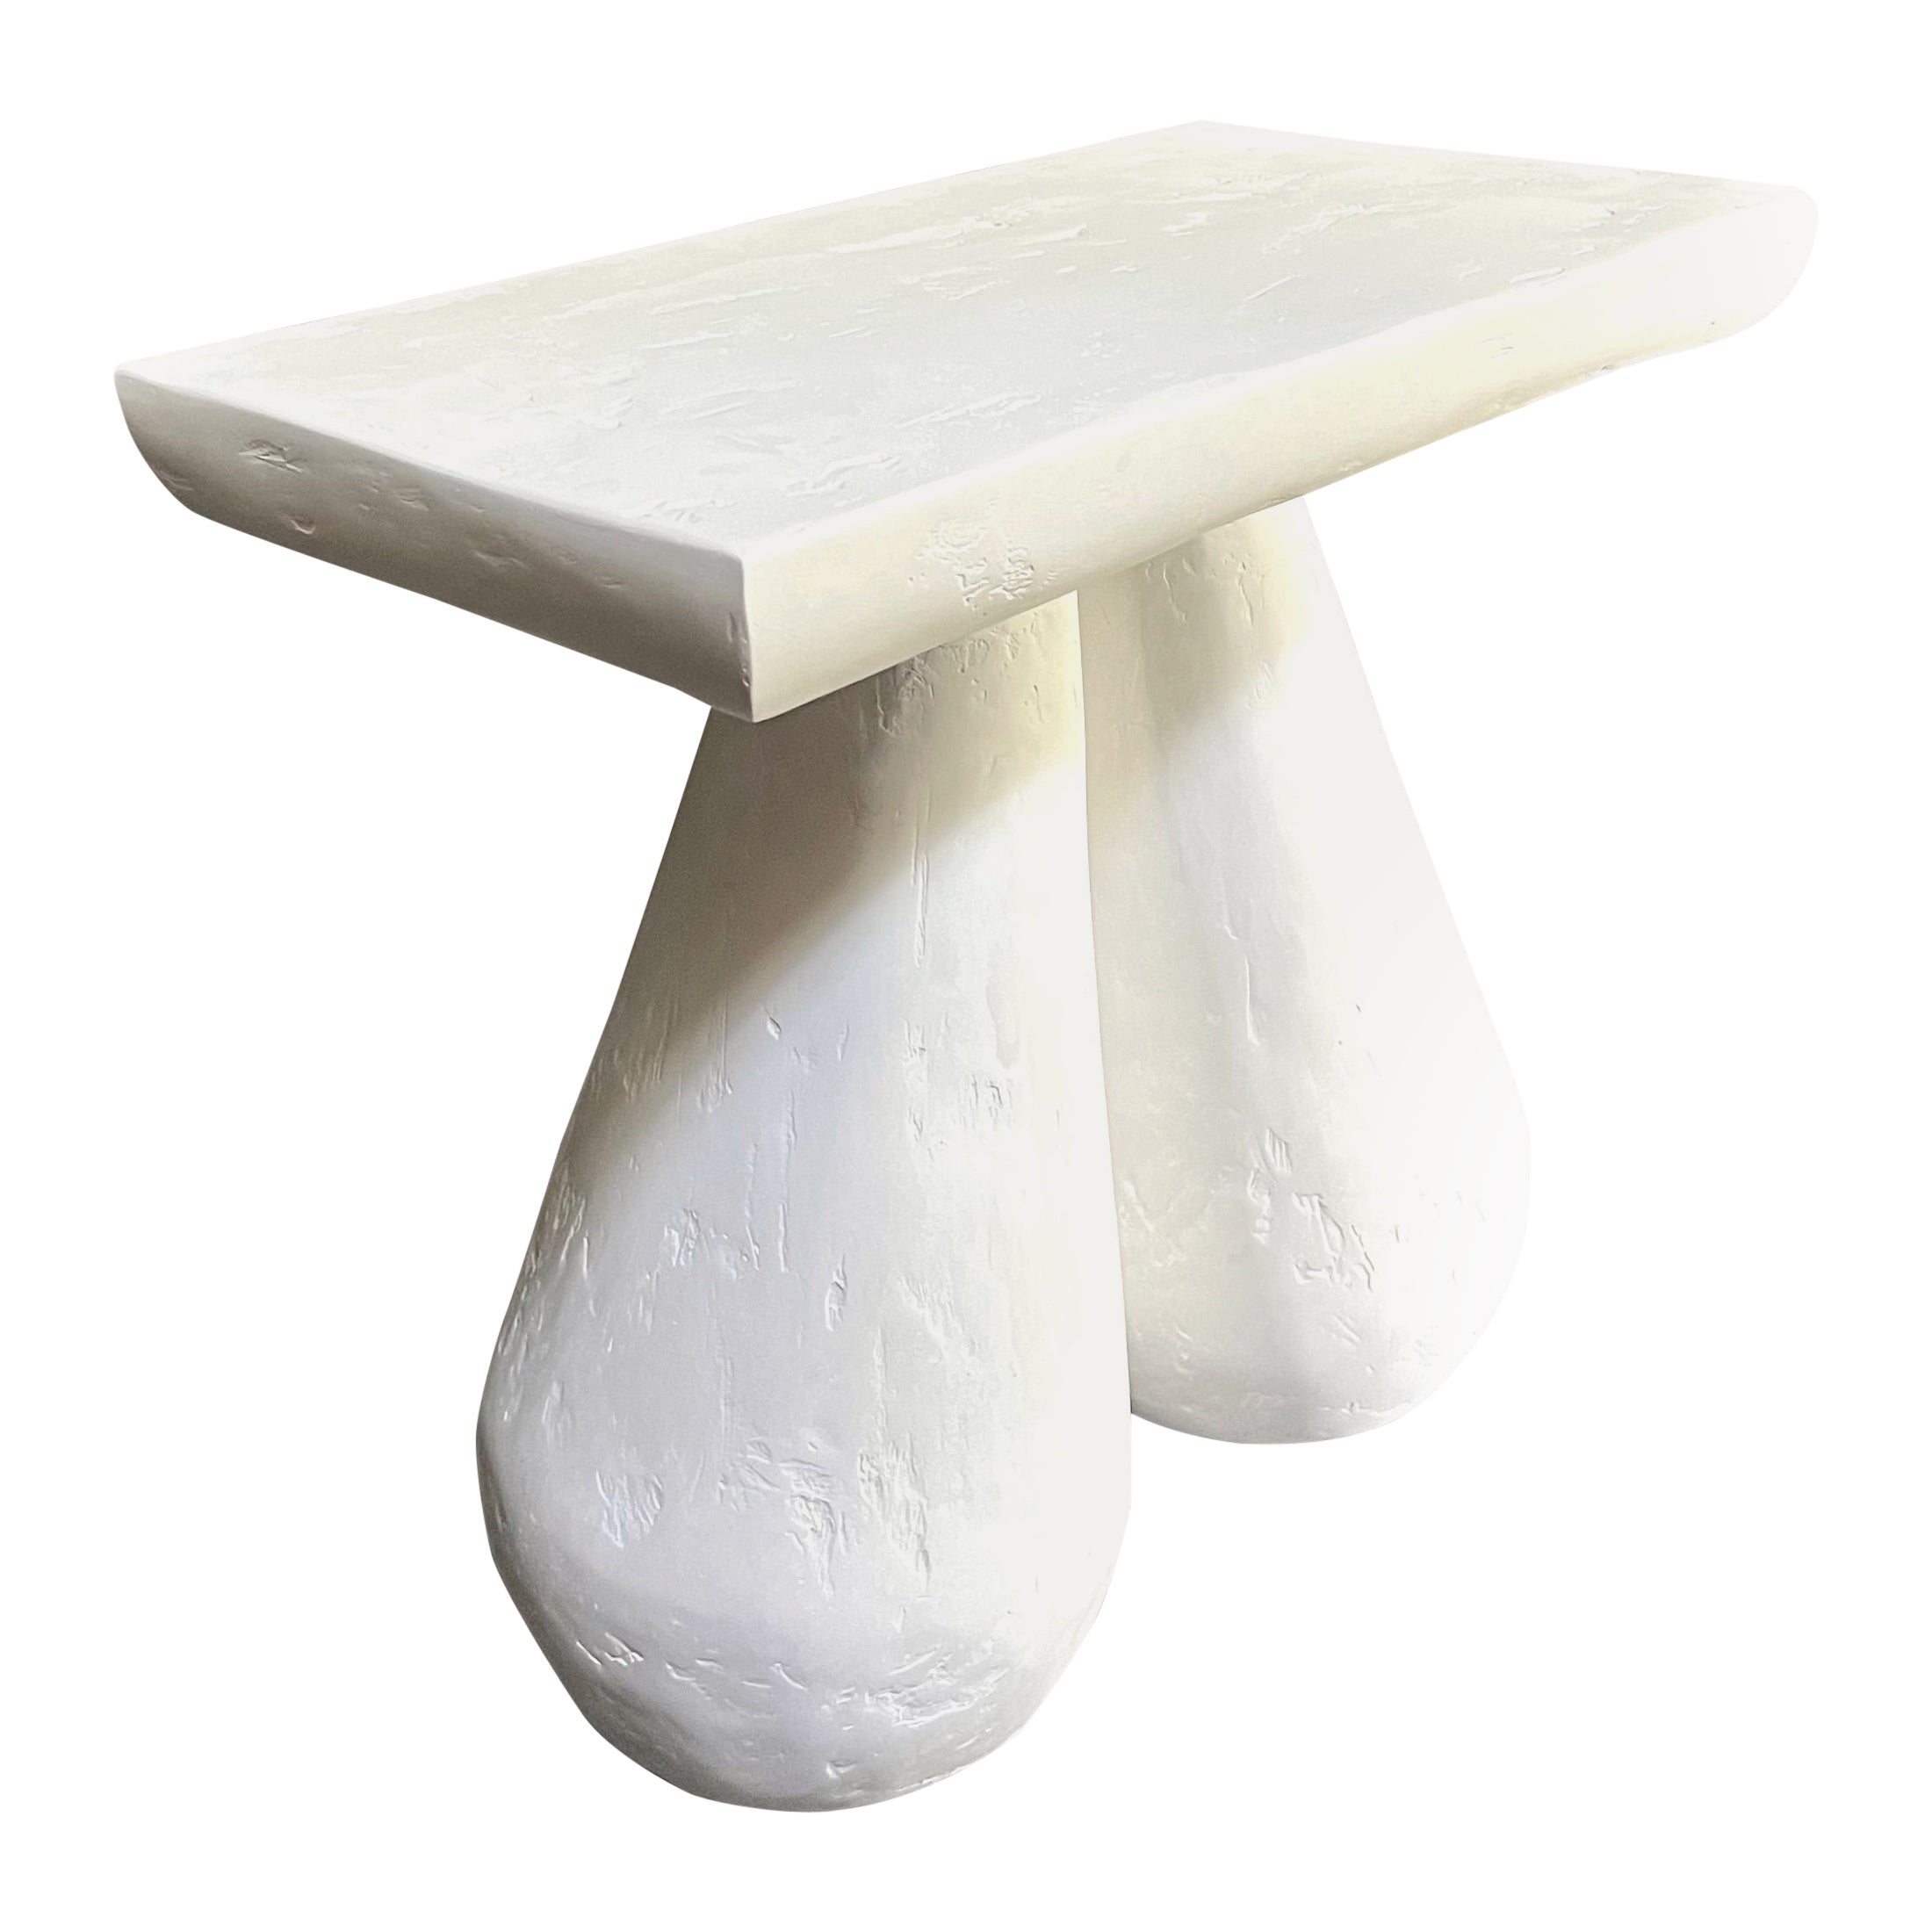 American Erika Mini Table - Modern Hand Crafted Plaster Table by Artist Gabriel Anderson For Sale